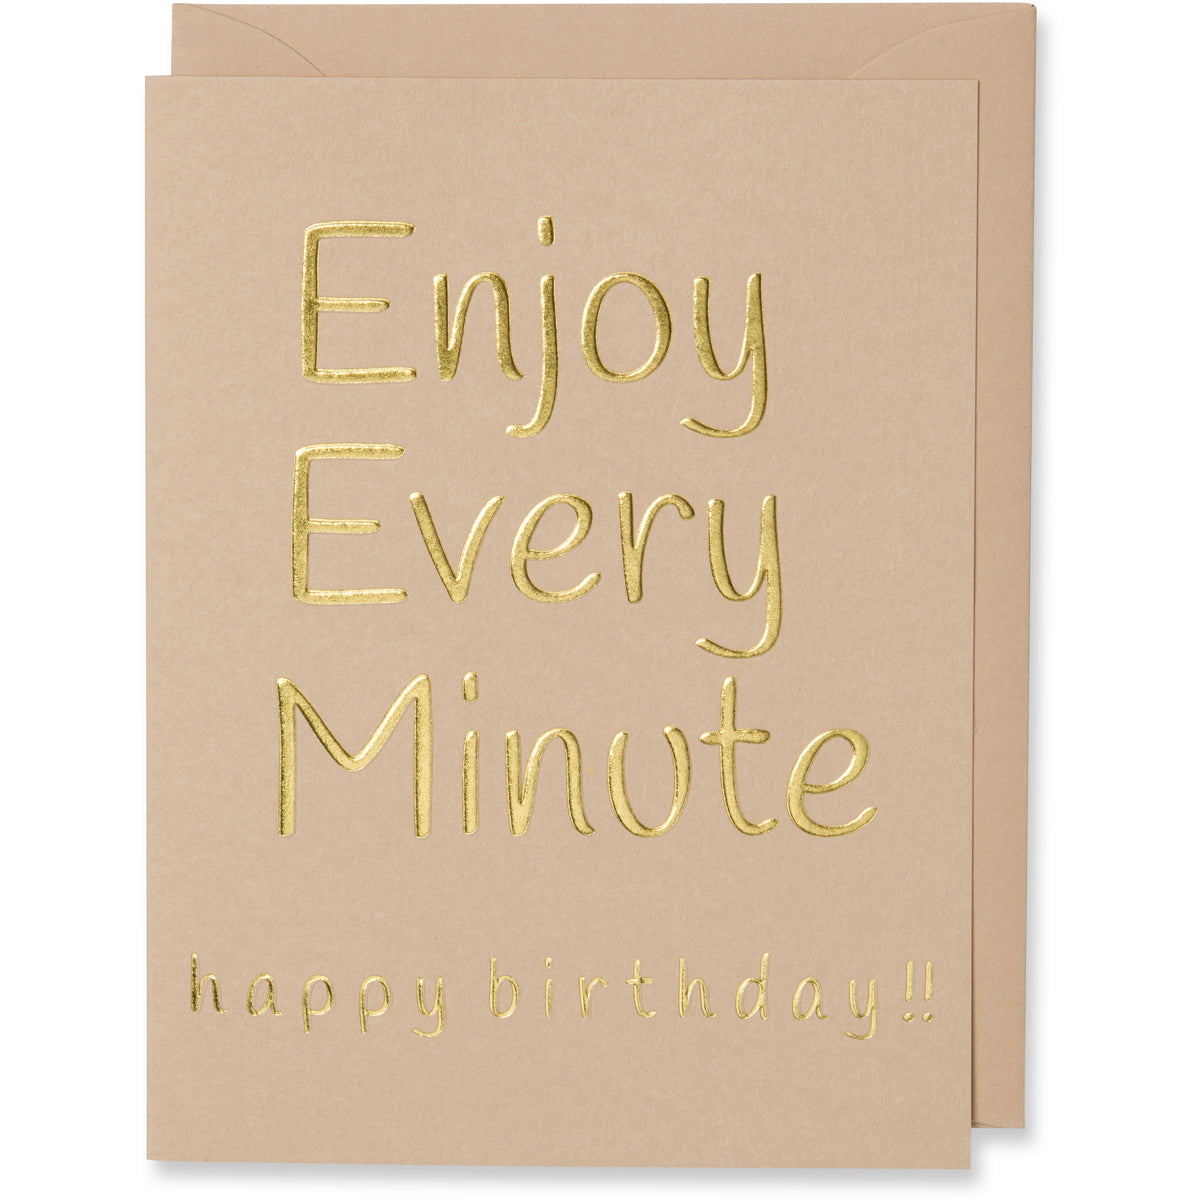 Gold Foil Embossed Enjoy Every Minute Birthday Card. Tan Paper, Tan Color Envelope Or a White Gold Metallic Envelope.